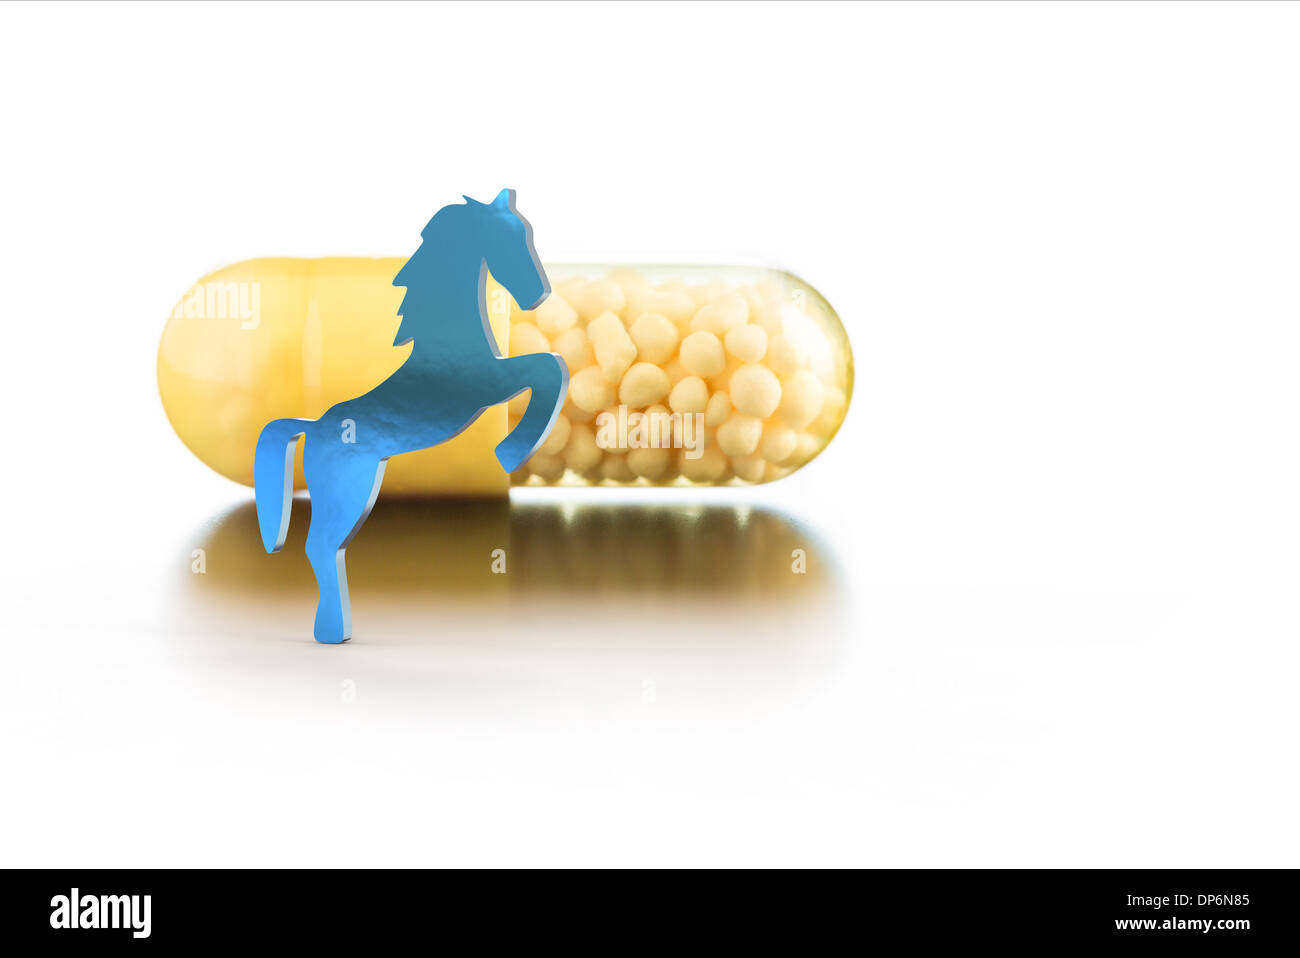 vitamins in capsules and toy horse Stock Photo